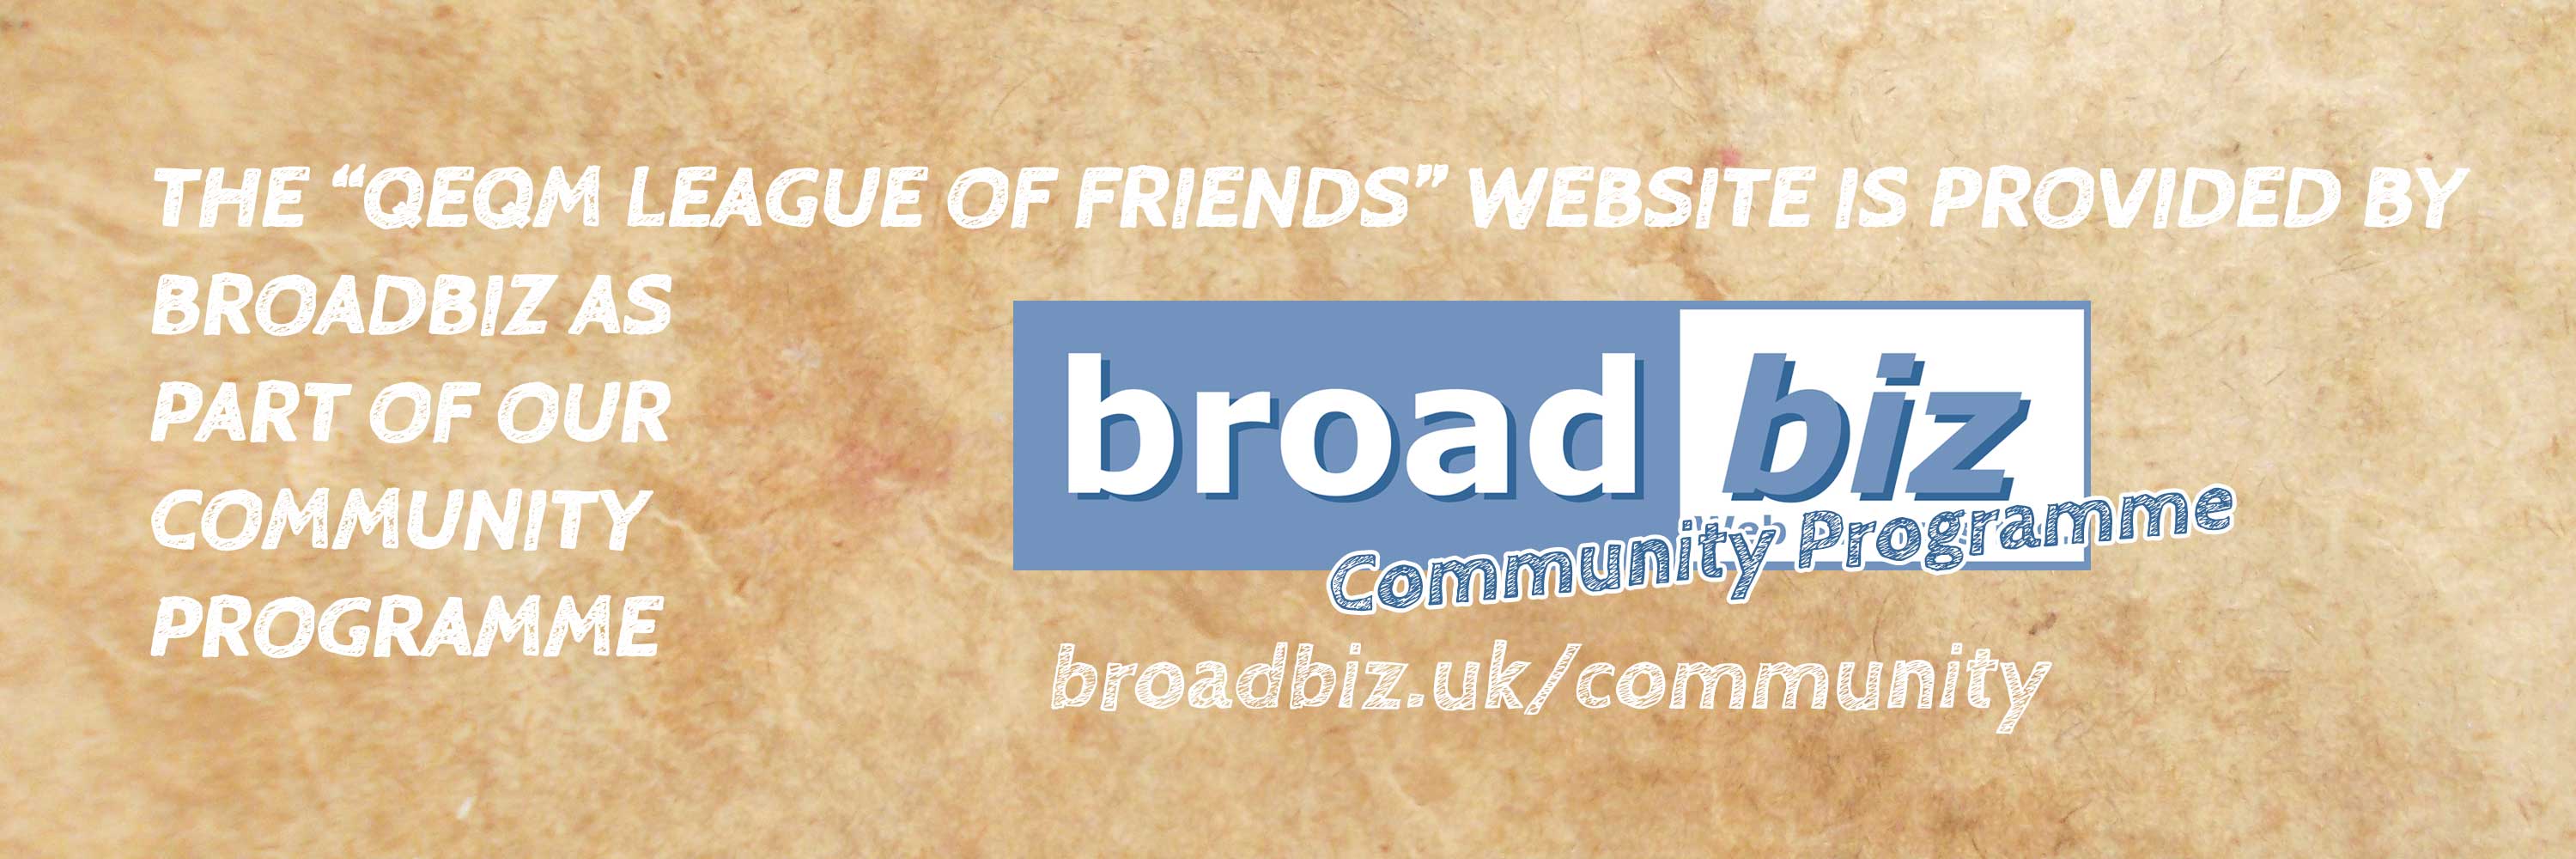 The QEQM League of Friends website is provided by Broadbiz as part of our Community Programme